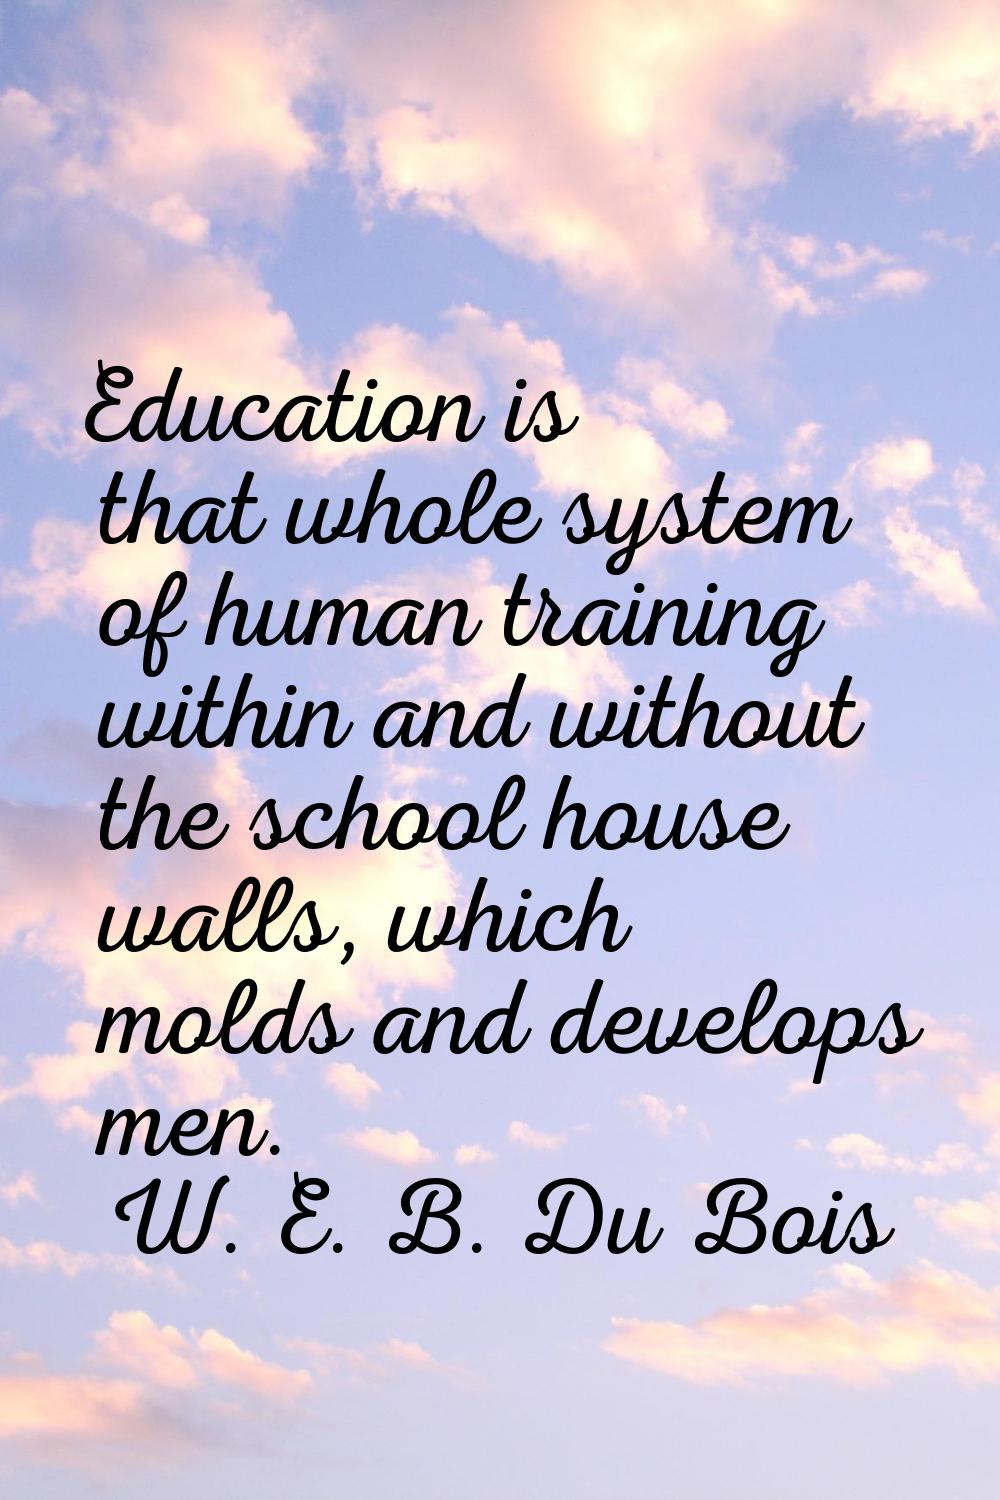 Education is that whole system of human training within and without the school house walls, which m